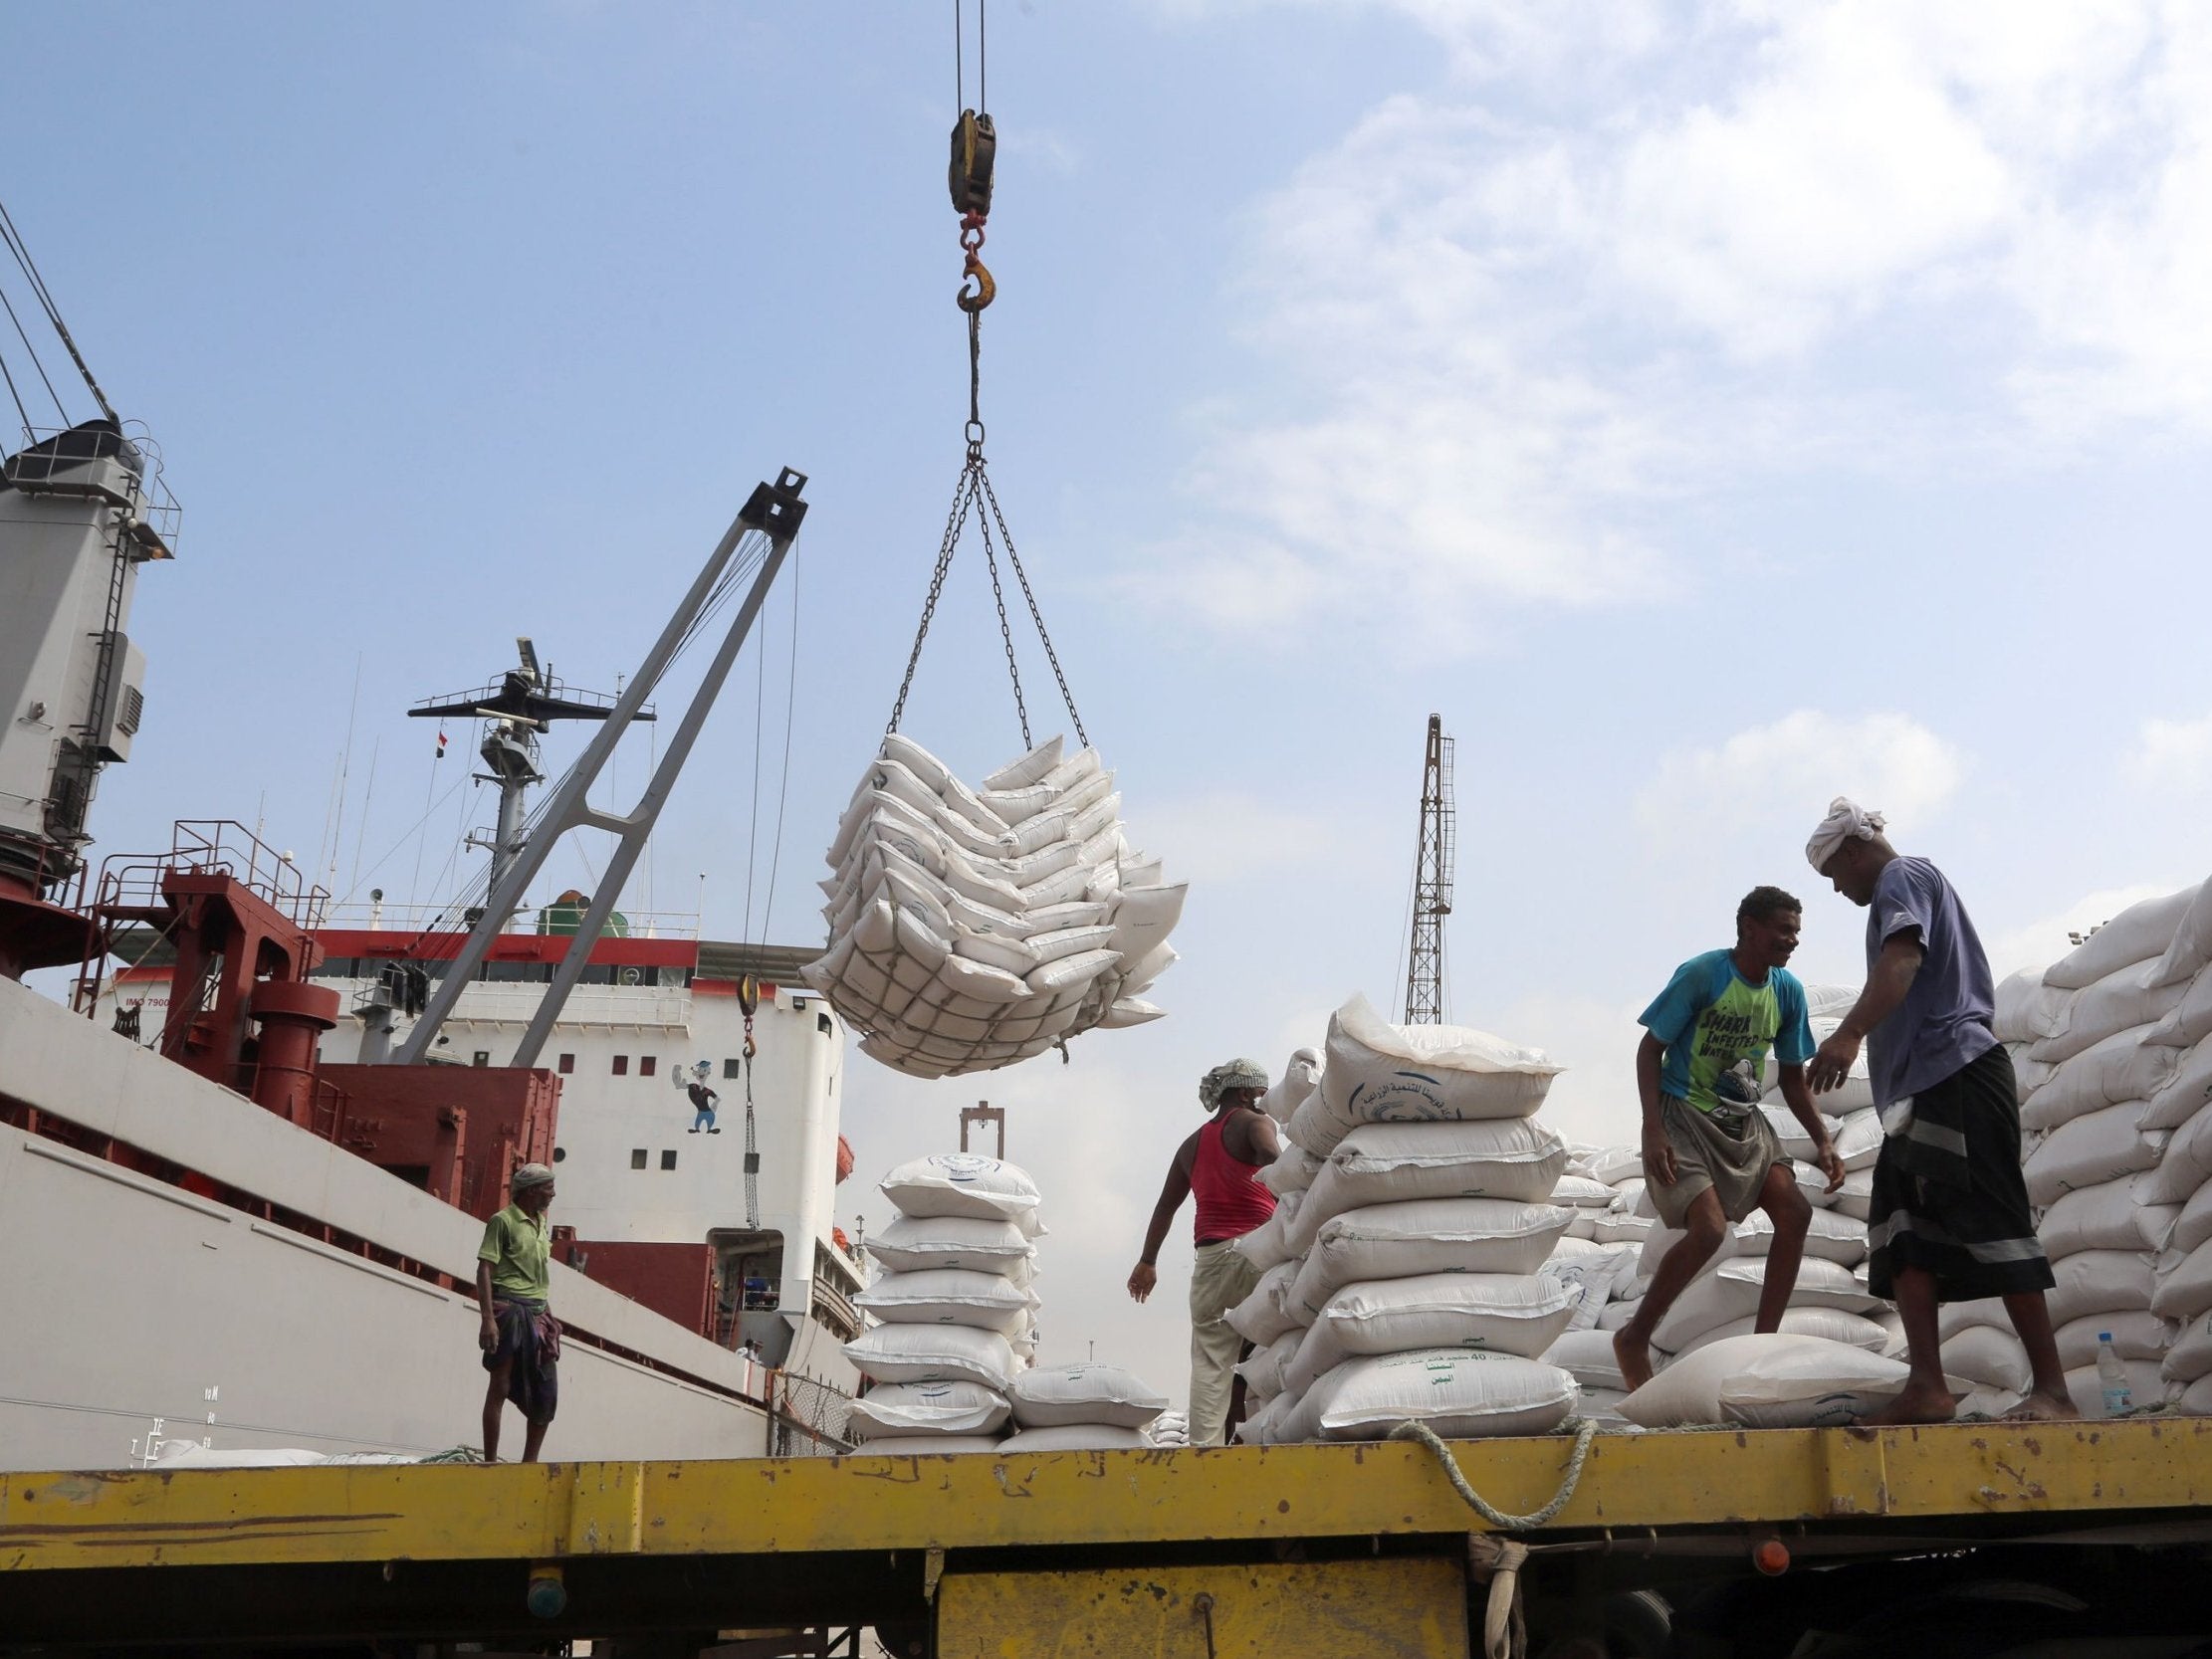 Workers unload wheat assistance provided by Unicef from a cargo ship at the Red Sea port of Hodeidah in January